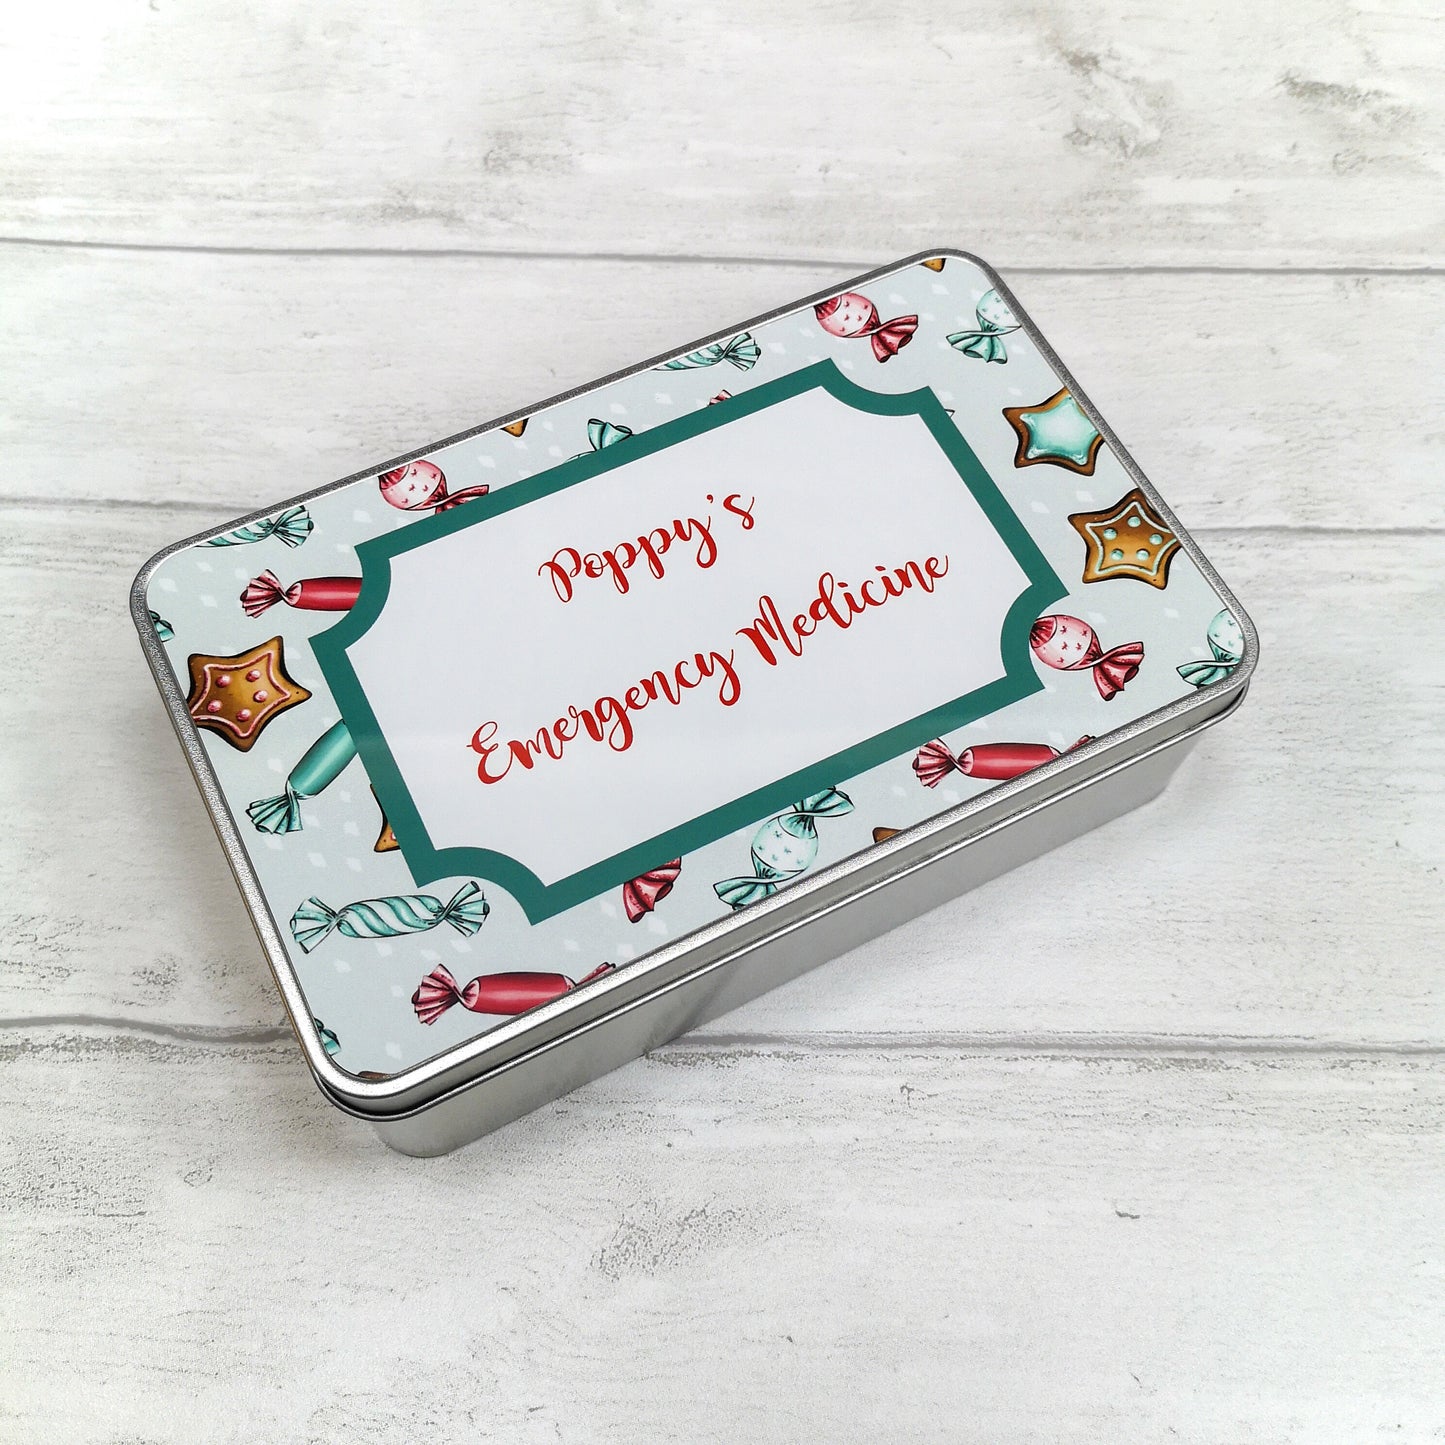 Personalised Sweet Tin, Sweet Treats, Gift for Grandparents, Fathers Day Gift